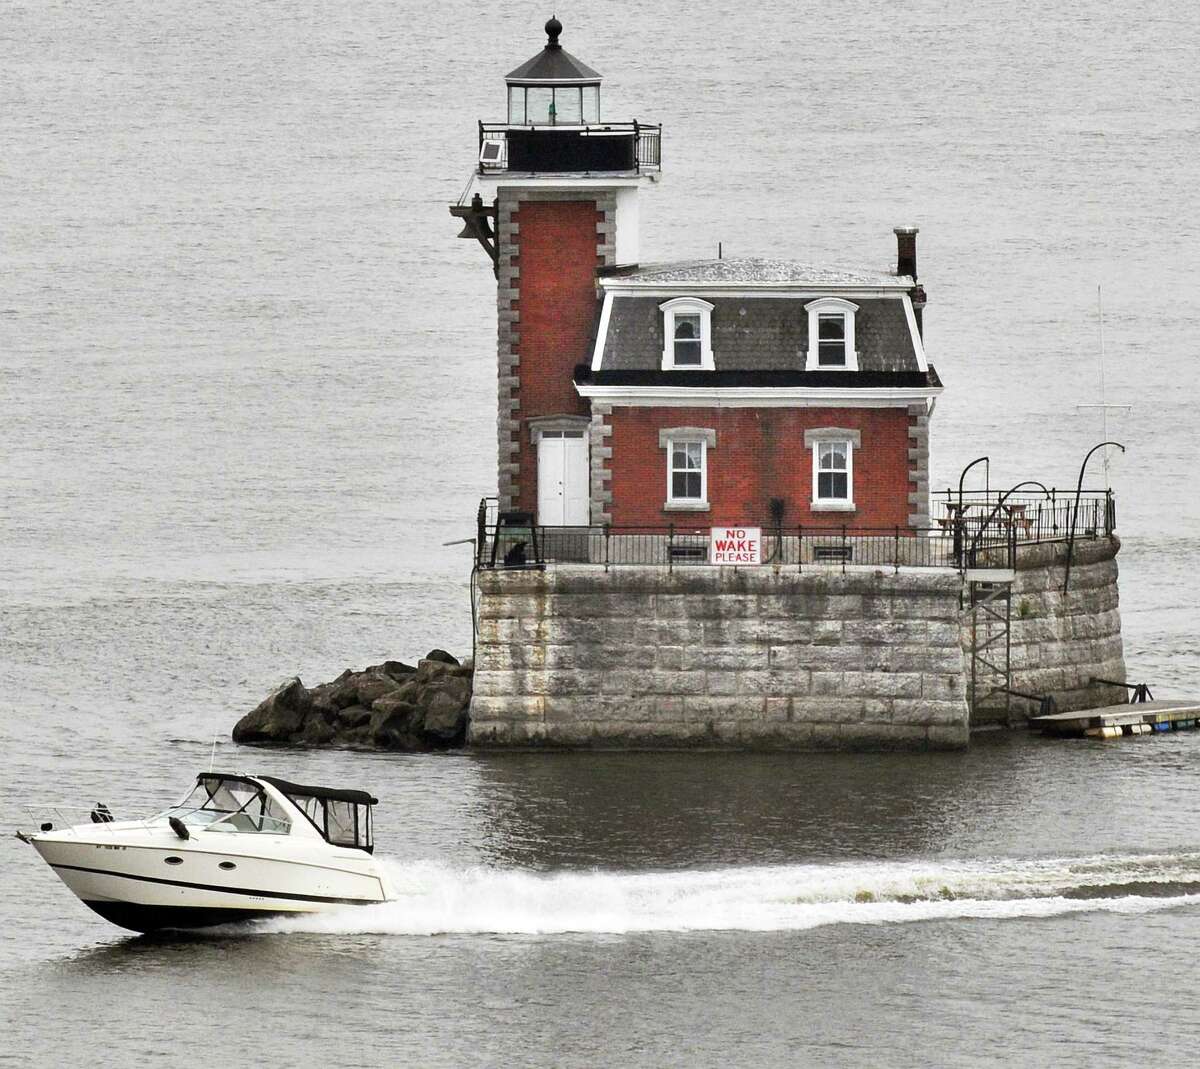 A view of the Hudson-Athens Lighthouse, looking northeast towards Hudson, as seen in 2011. The lighthouse preservation society in 2021 has received $4,000 to study its structural integrity. (Times Union file photo)